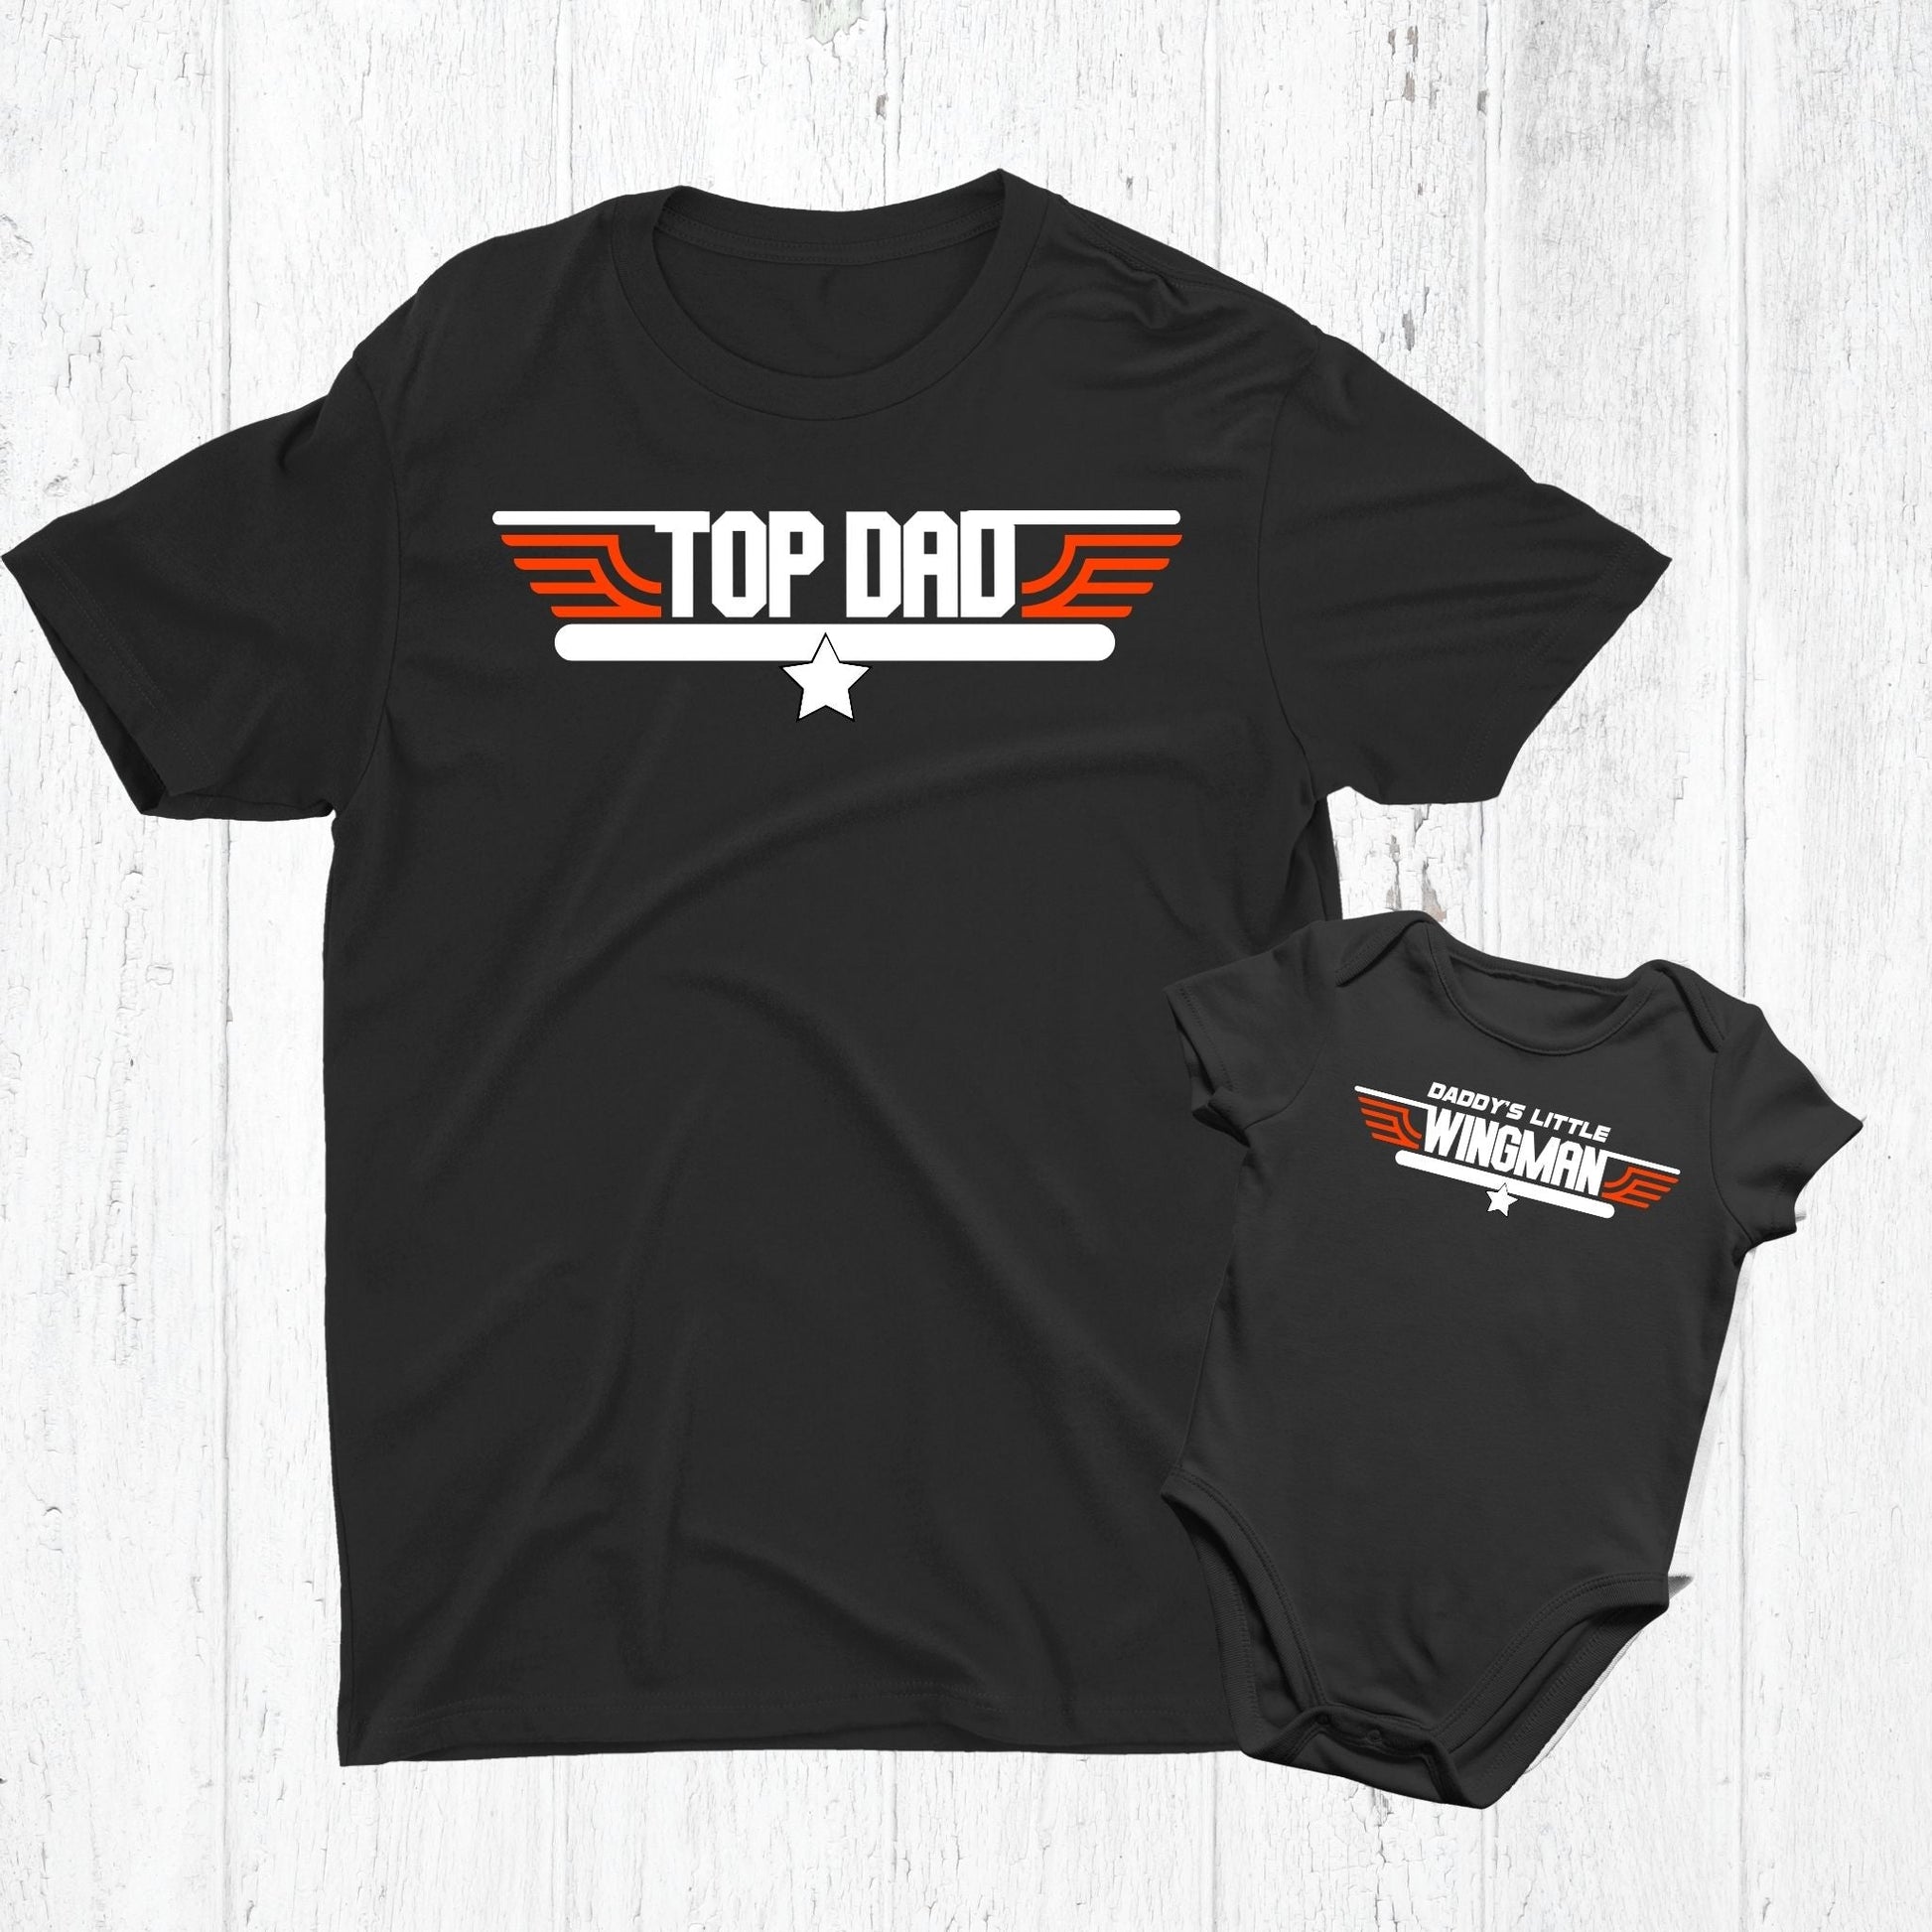 Top Dad Matching Set for Dad and Baby - Three2Tango Tee's